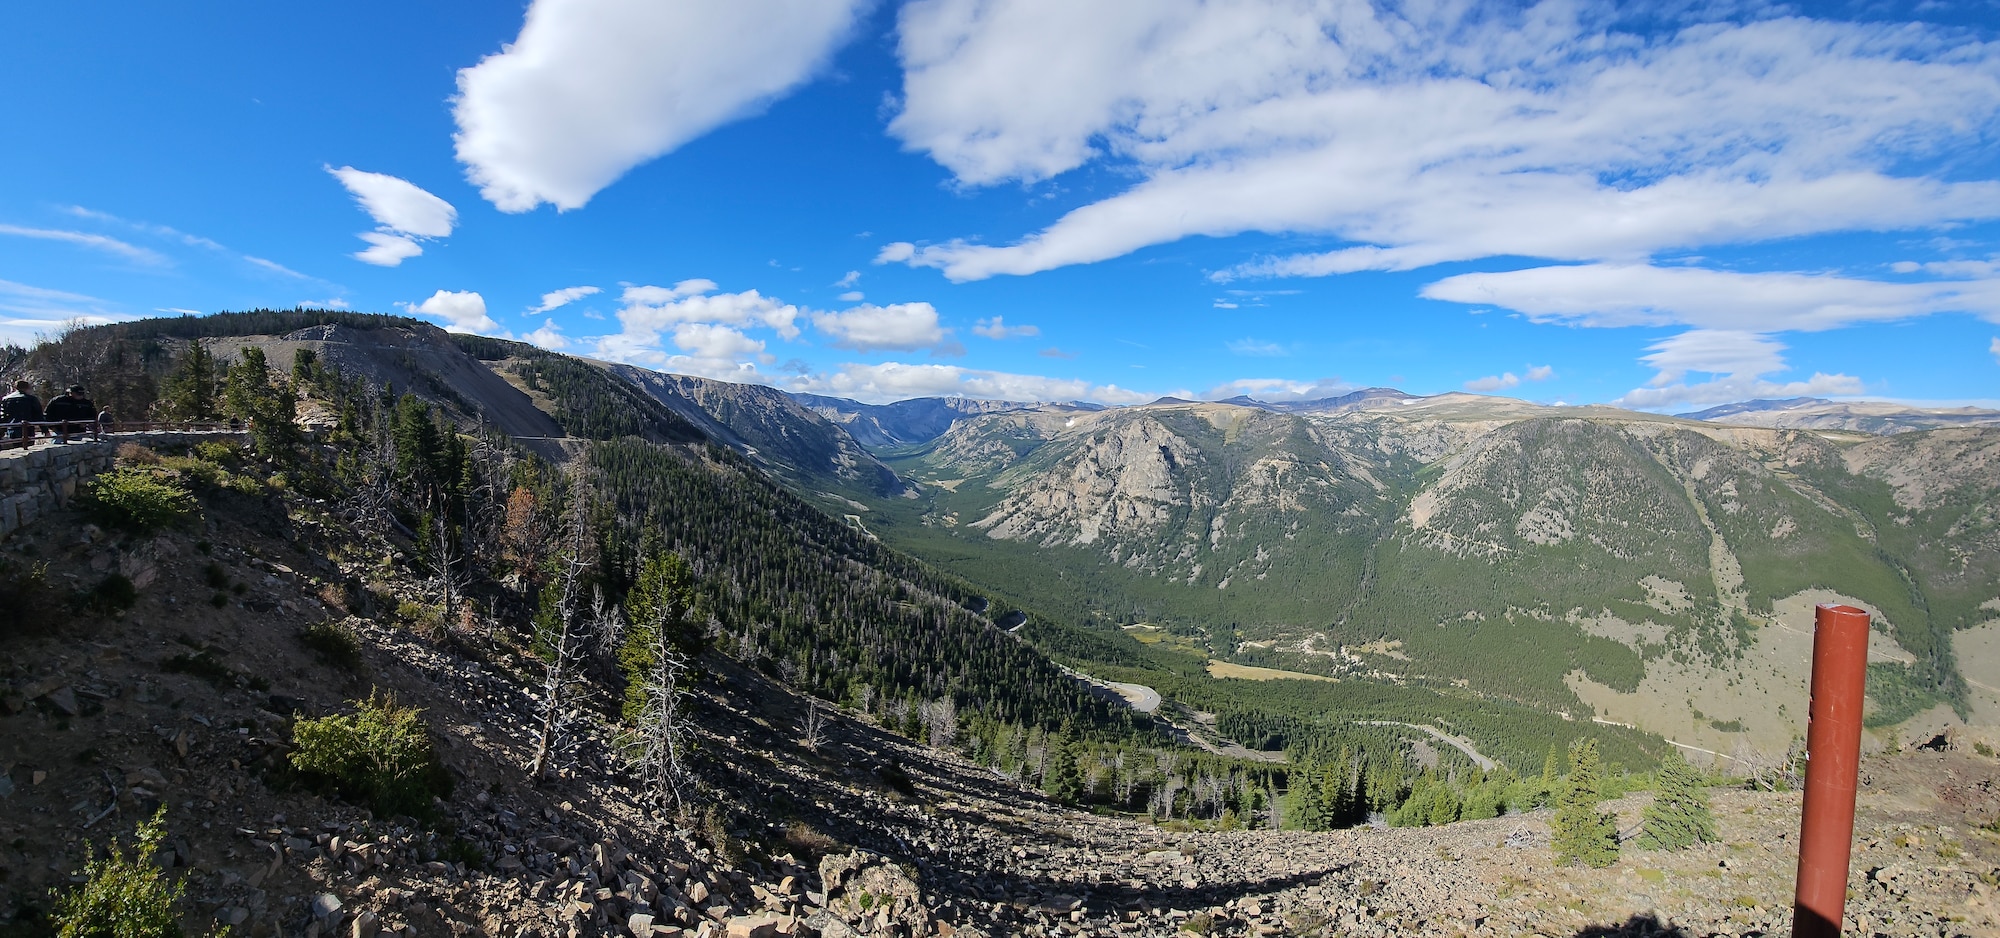 beautiful scenery of mountains off the Beartooth Highway